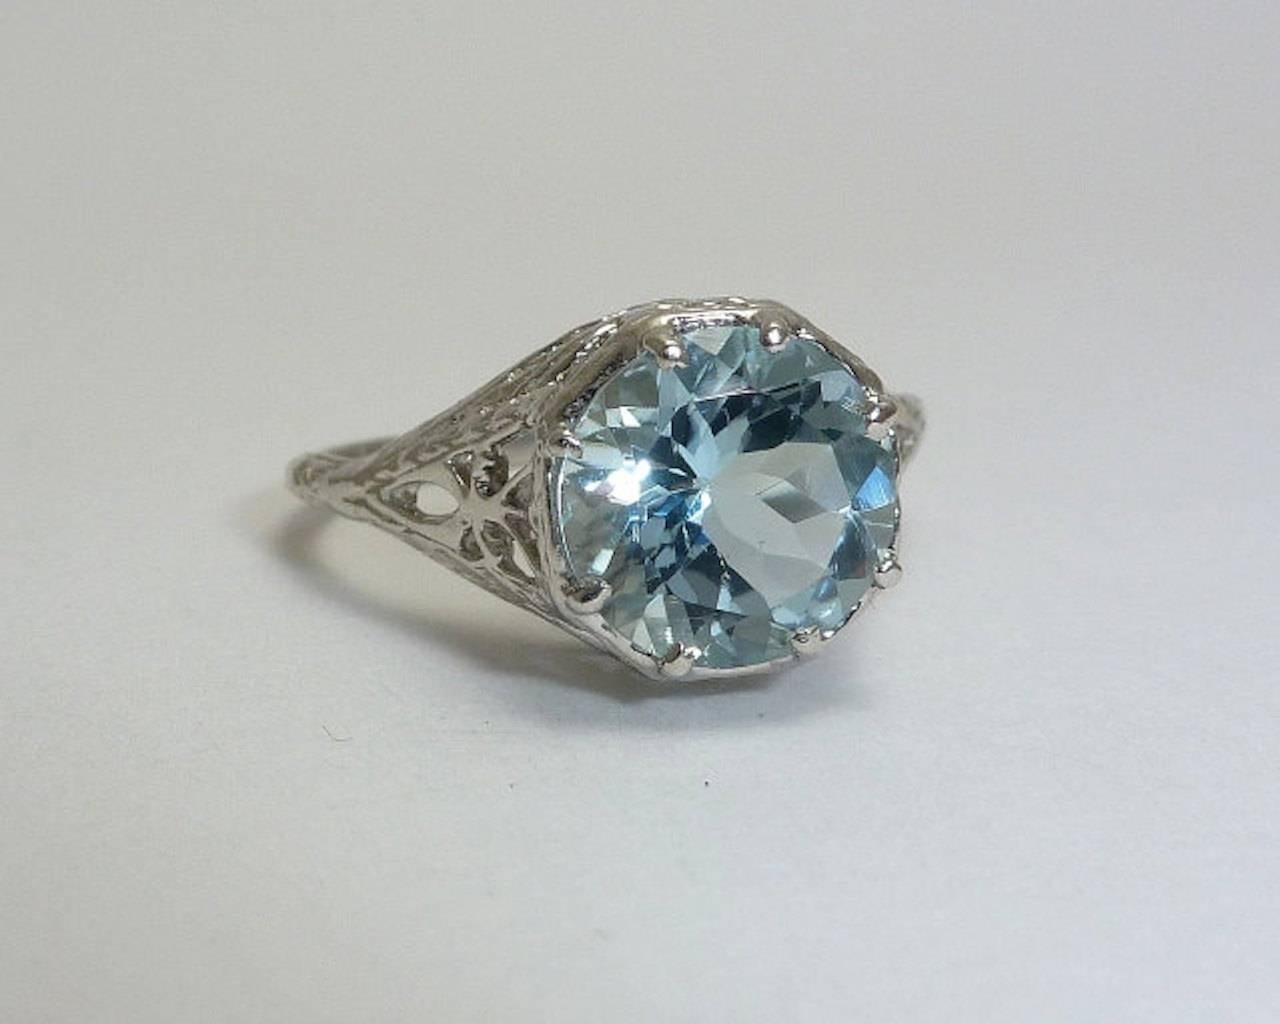 A stunning aquamarine filigree ring crafted in luxurious platinum. Centered by a single round substantial 8mm aquamarine, this stunning ring features beautiful pierced filigree work throughout complemented by beautiful hand engraving.

Weighing in